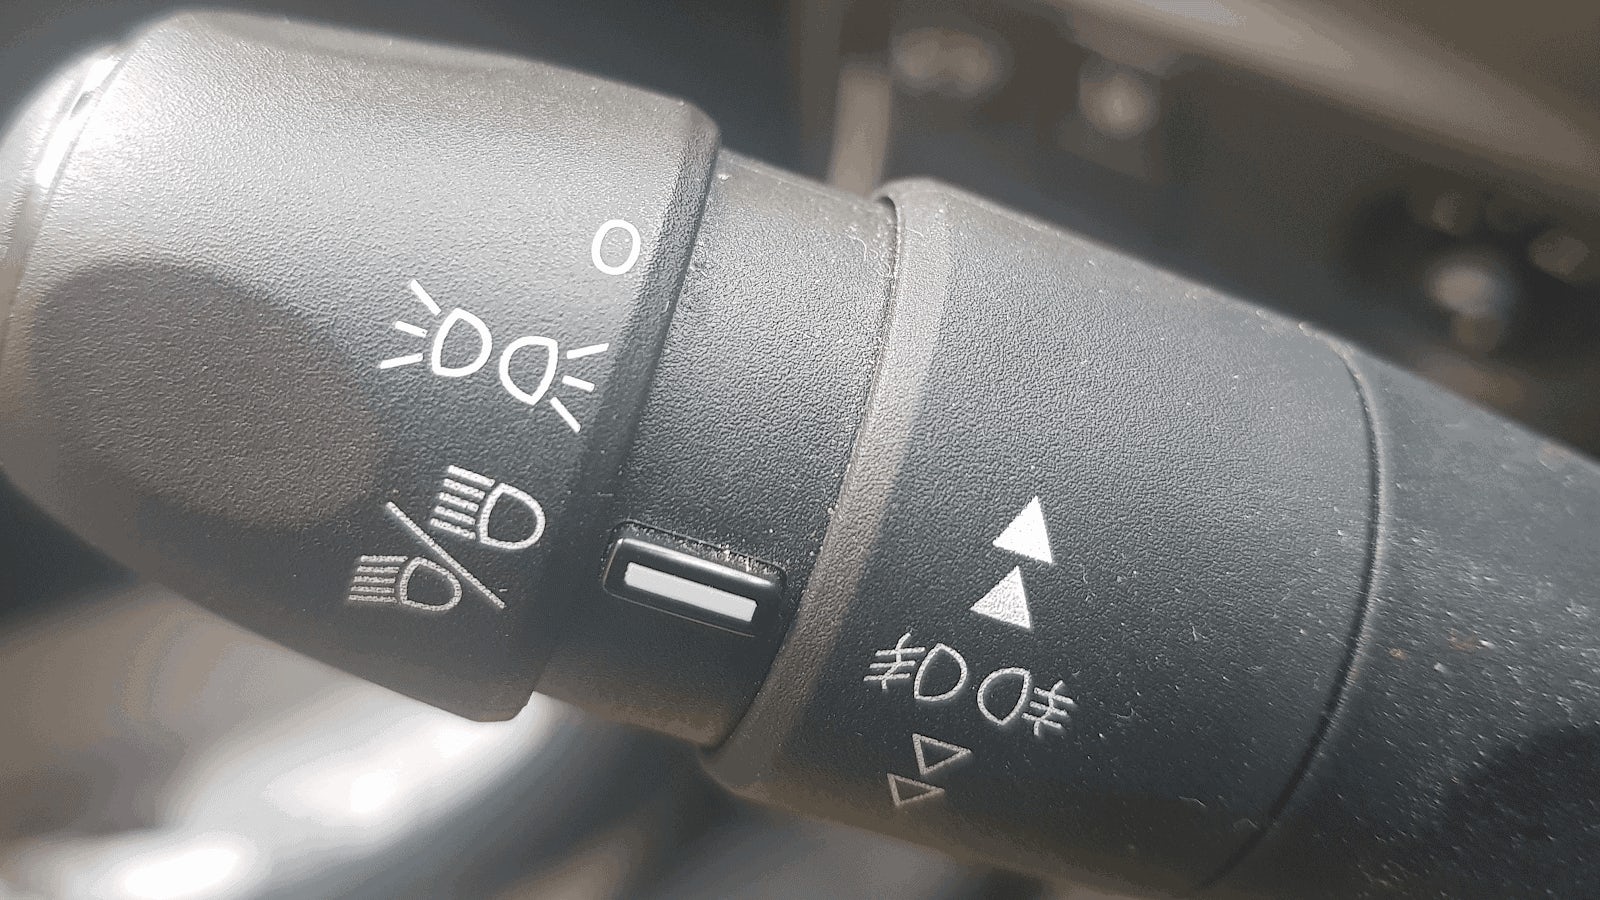 the low beam symbol on the lever